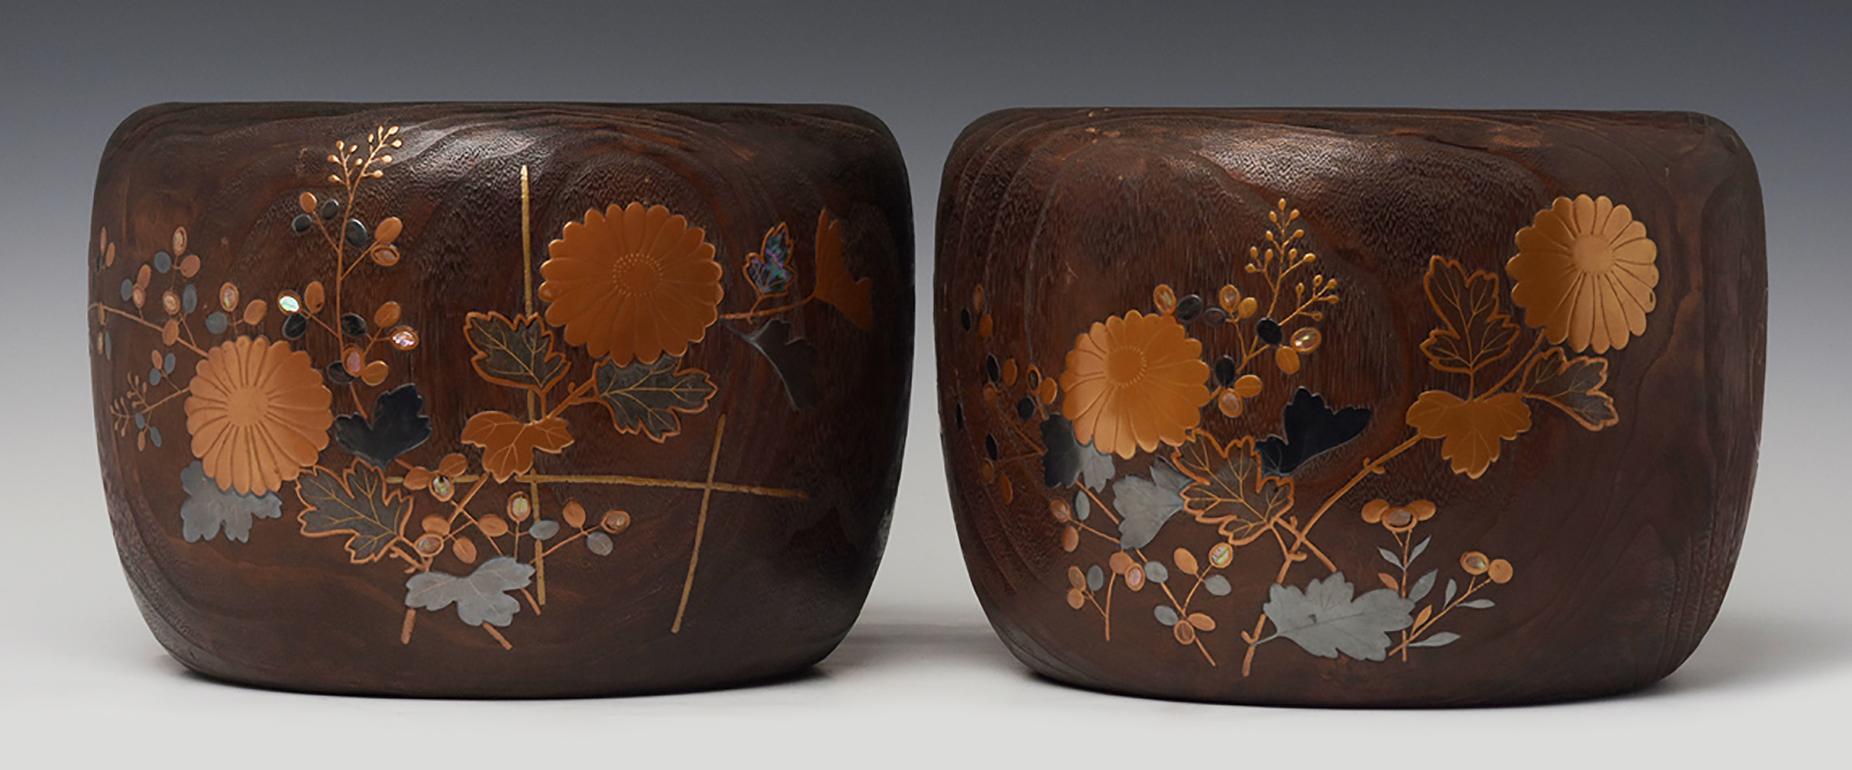 A pair of Japanese Keyaki wooden hibachi vessels with inlaid colored and gilt bronze.
Hibachi is a traditional Japanese heating device.

Age: Japan, Meiji Period, Late 19th Century
Size: Height 20 C.M. / Width 29.5 C.M.
Condition: Nice condition